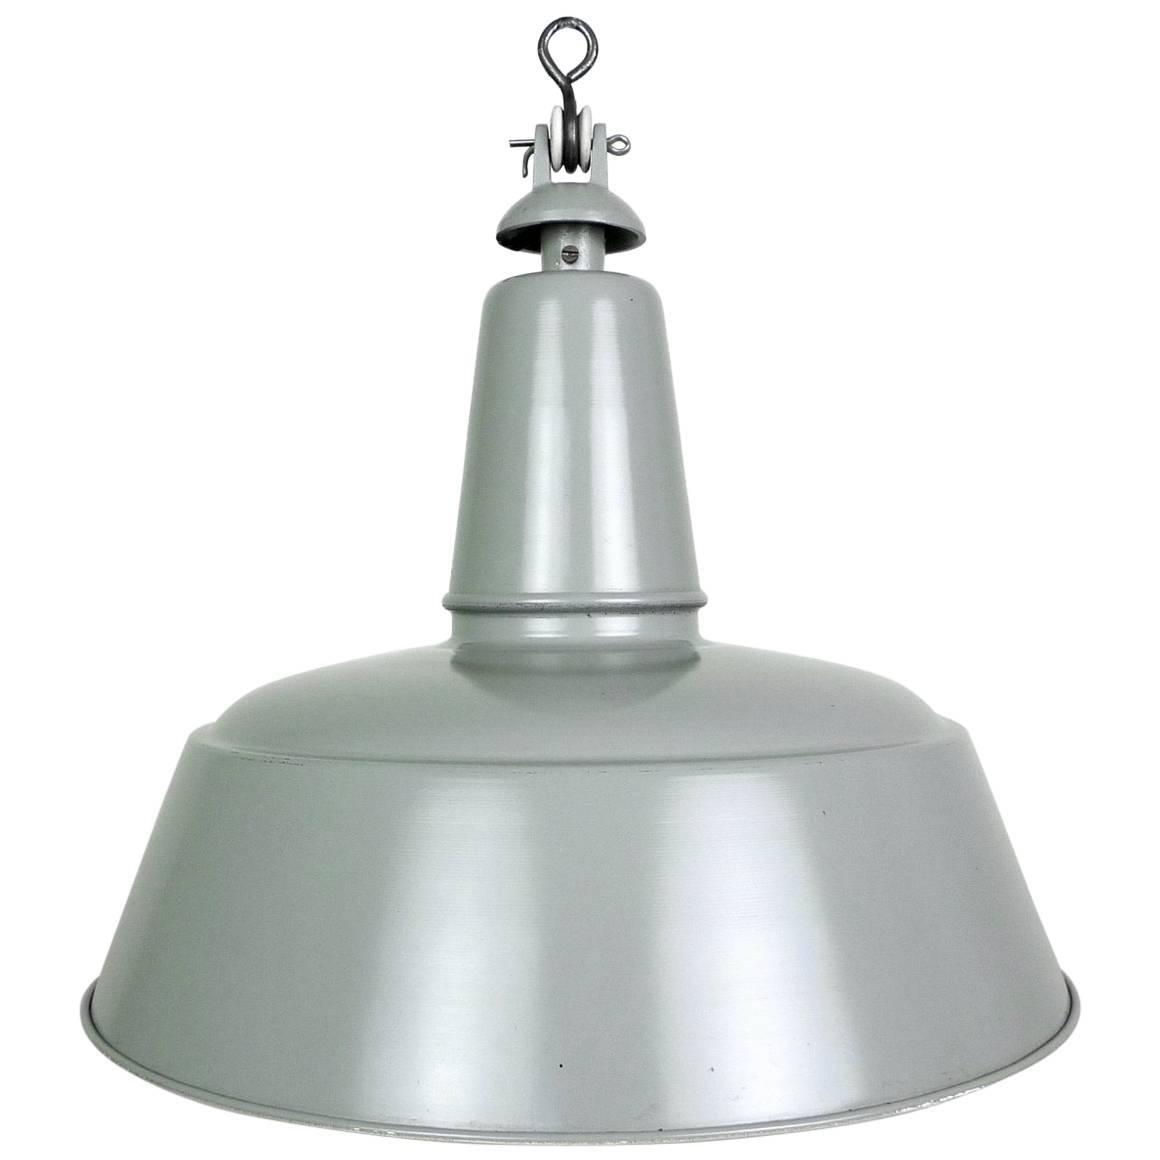 German Light-Gray Metal Industrial Pendant from the 1950s